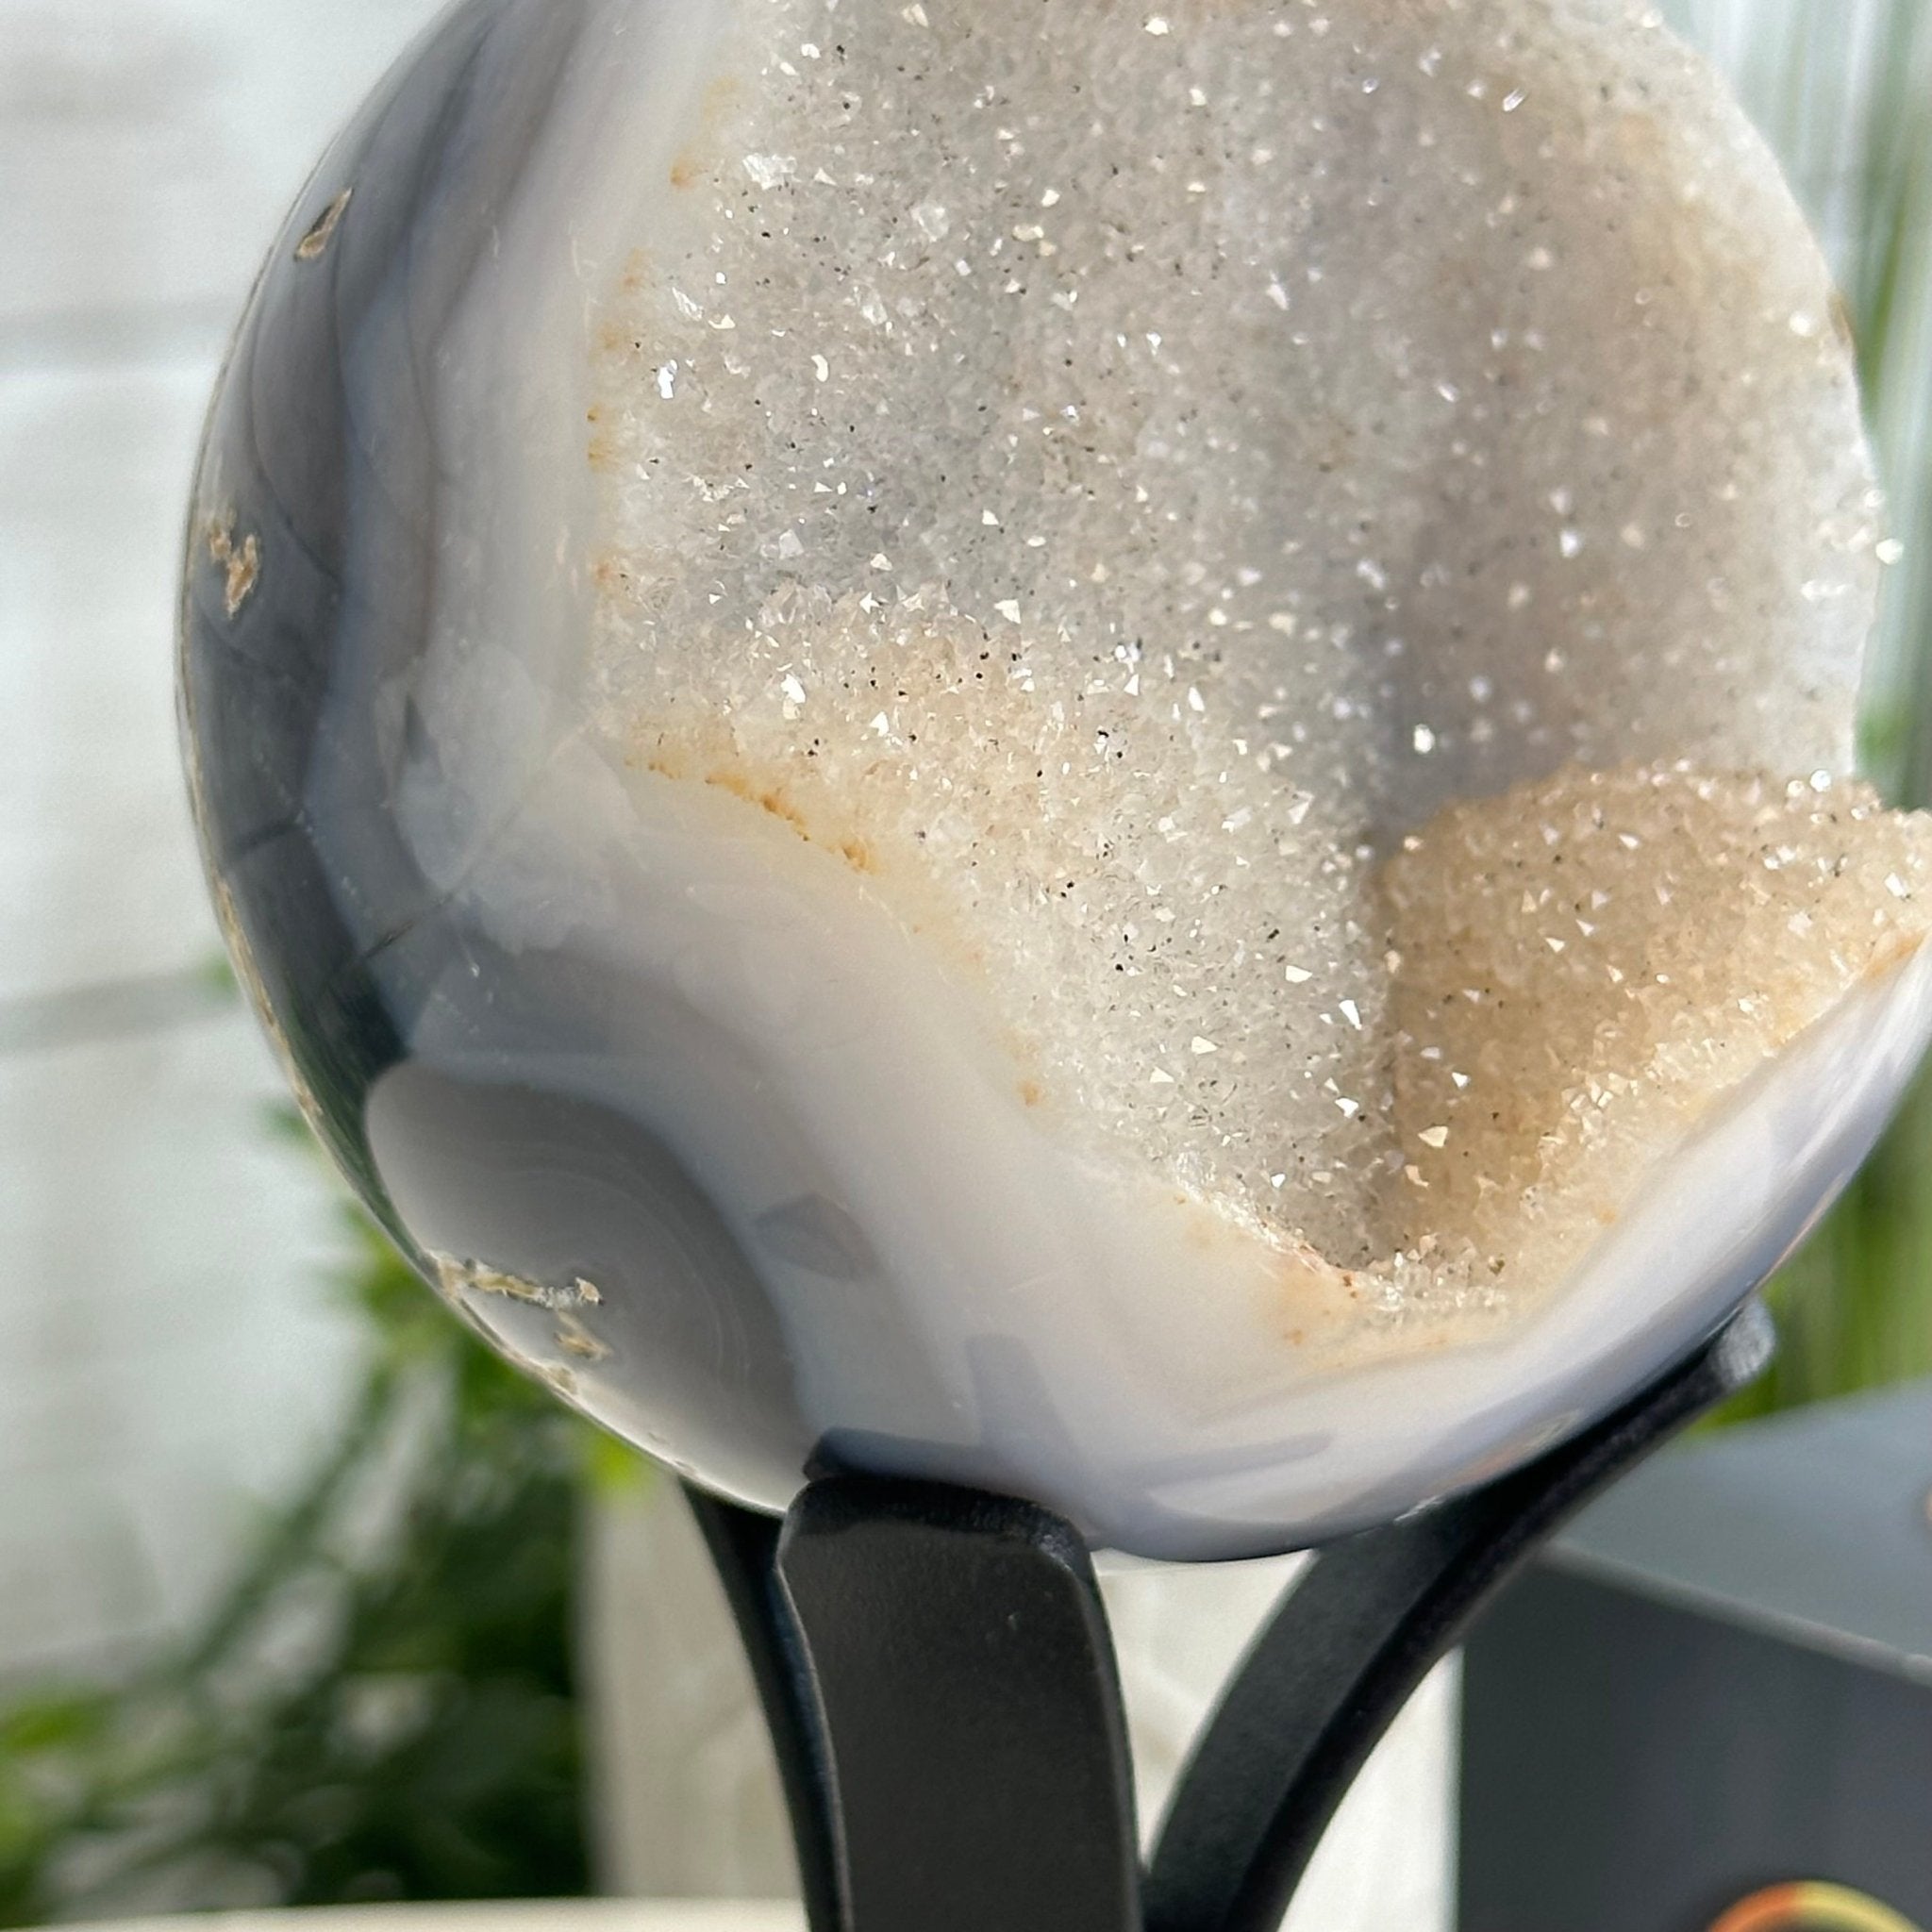 Druzy Agate Sphere on a Metal Stand, 1 lbs & 6.8" Tall #5634-0004 - Brazil GemsBrazil GemsDruzy Agate Sphere on a Metal Stand, 1 lbs & 6.8" Tall #5634-0004Spheres5634-0004